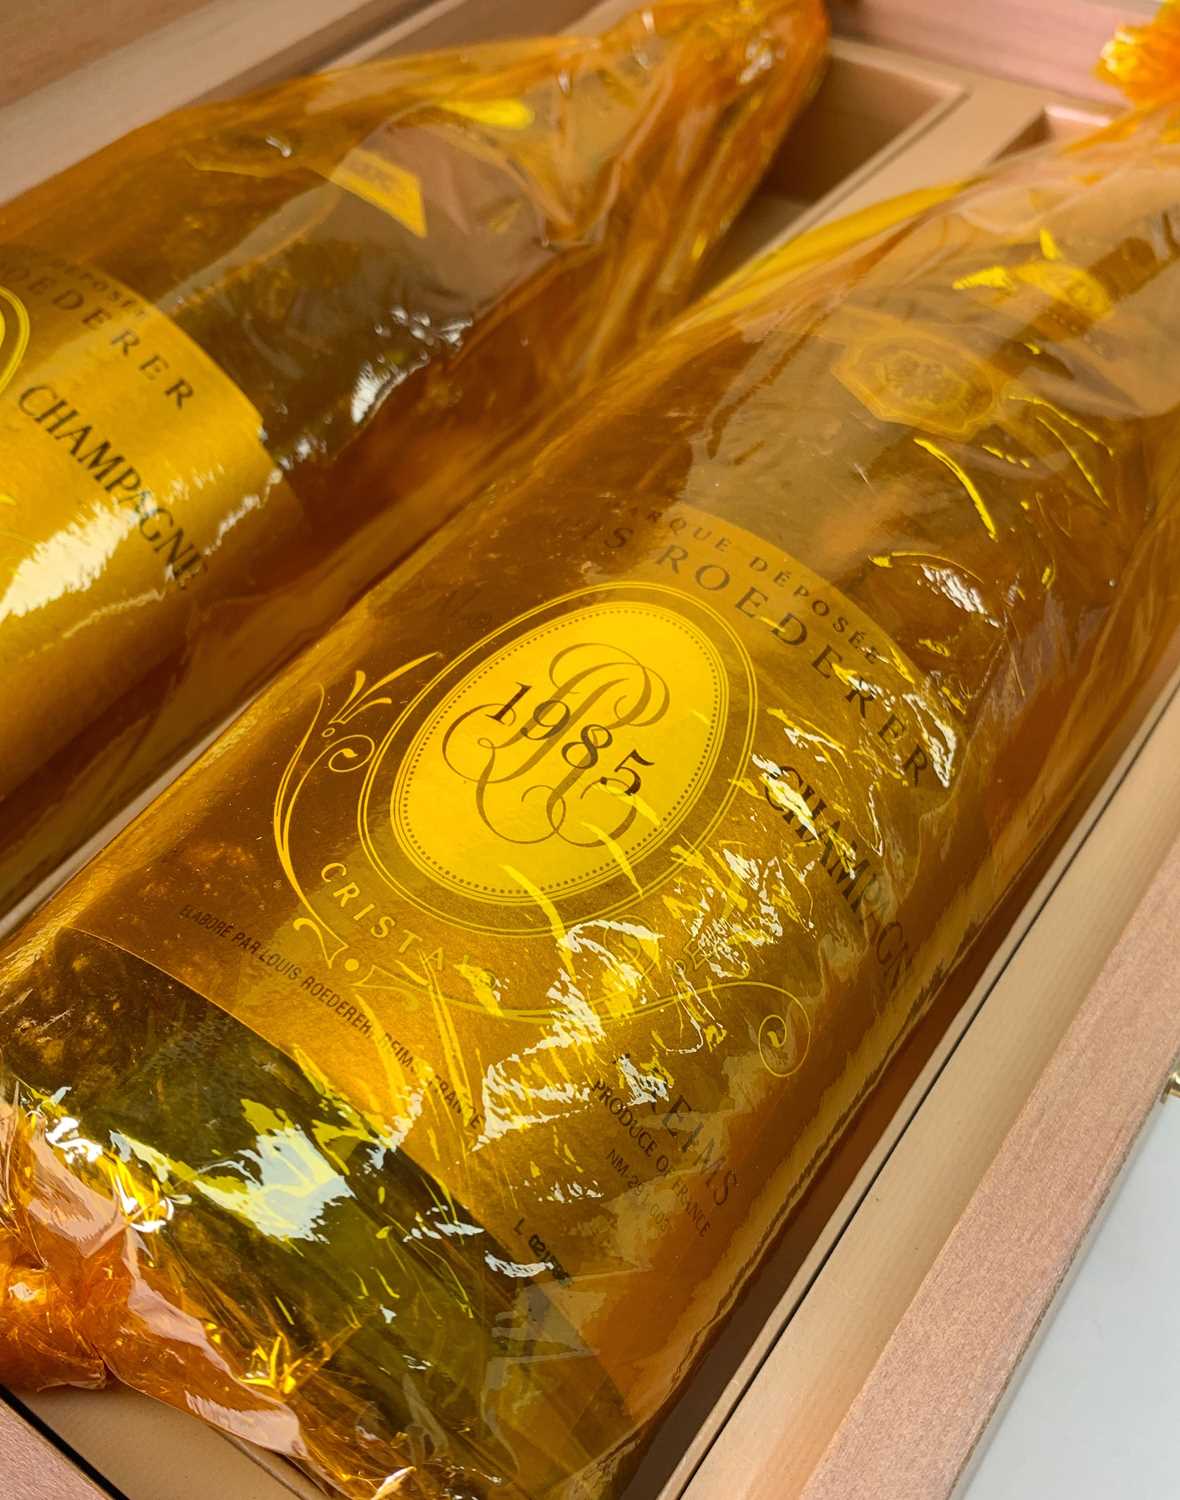 CHAMPAGNE LOUIS ROEDERER CRISTAL 1985 & 1990 MAGNUM PRESENTATION CASE 2 x 1500clExtremely rare - Image 4 of 4